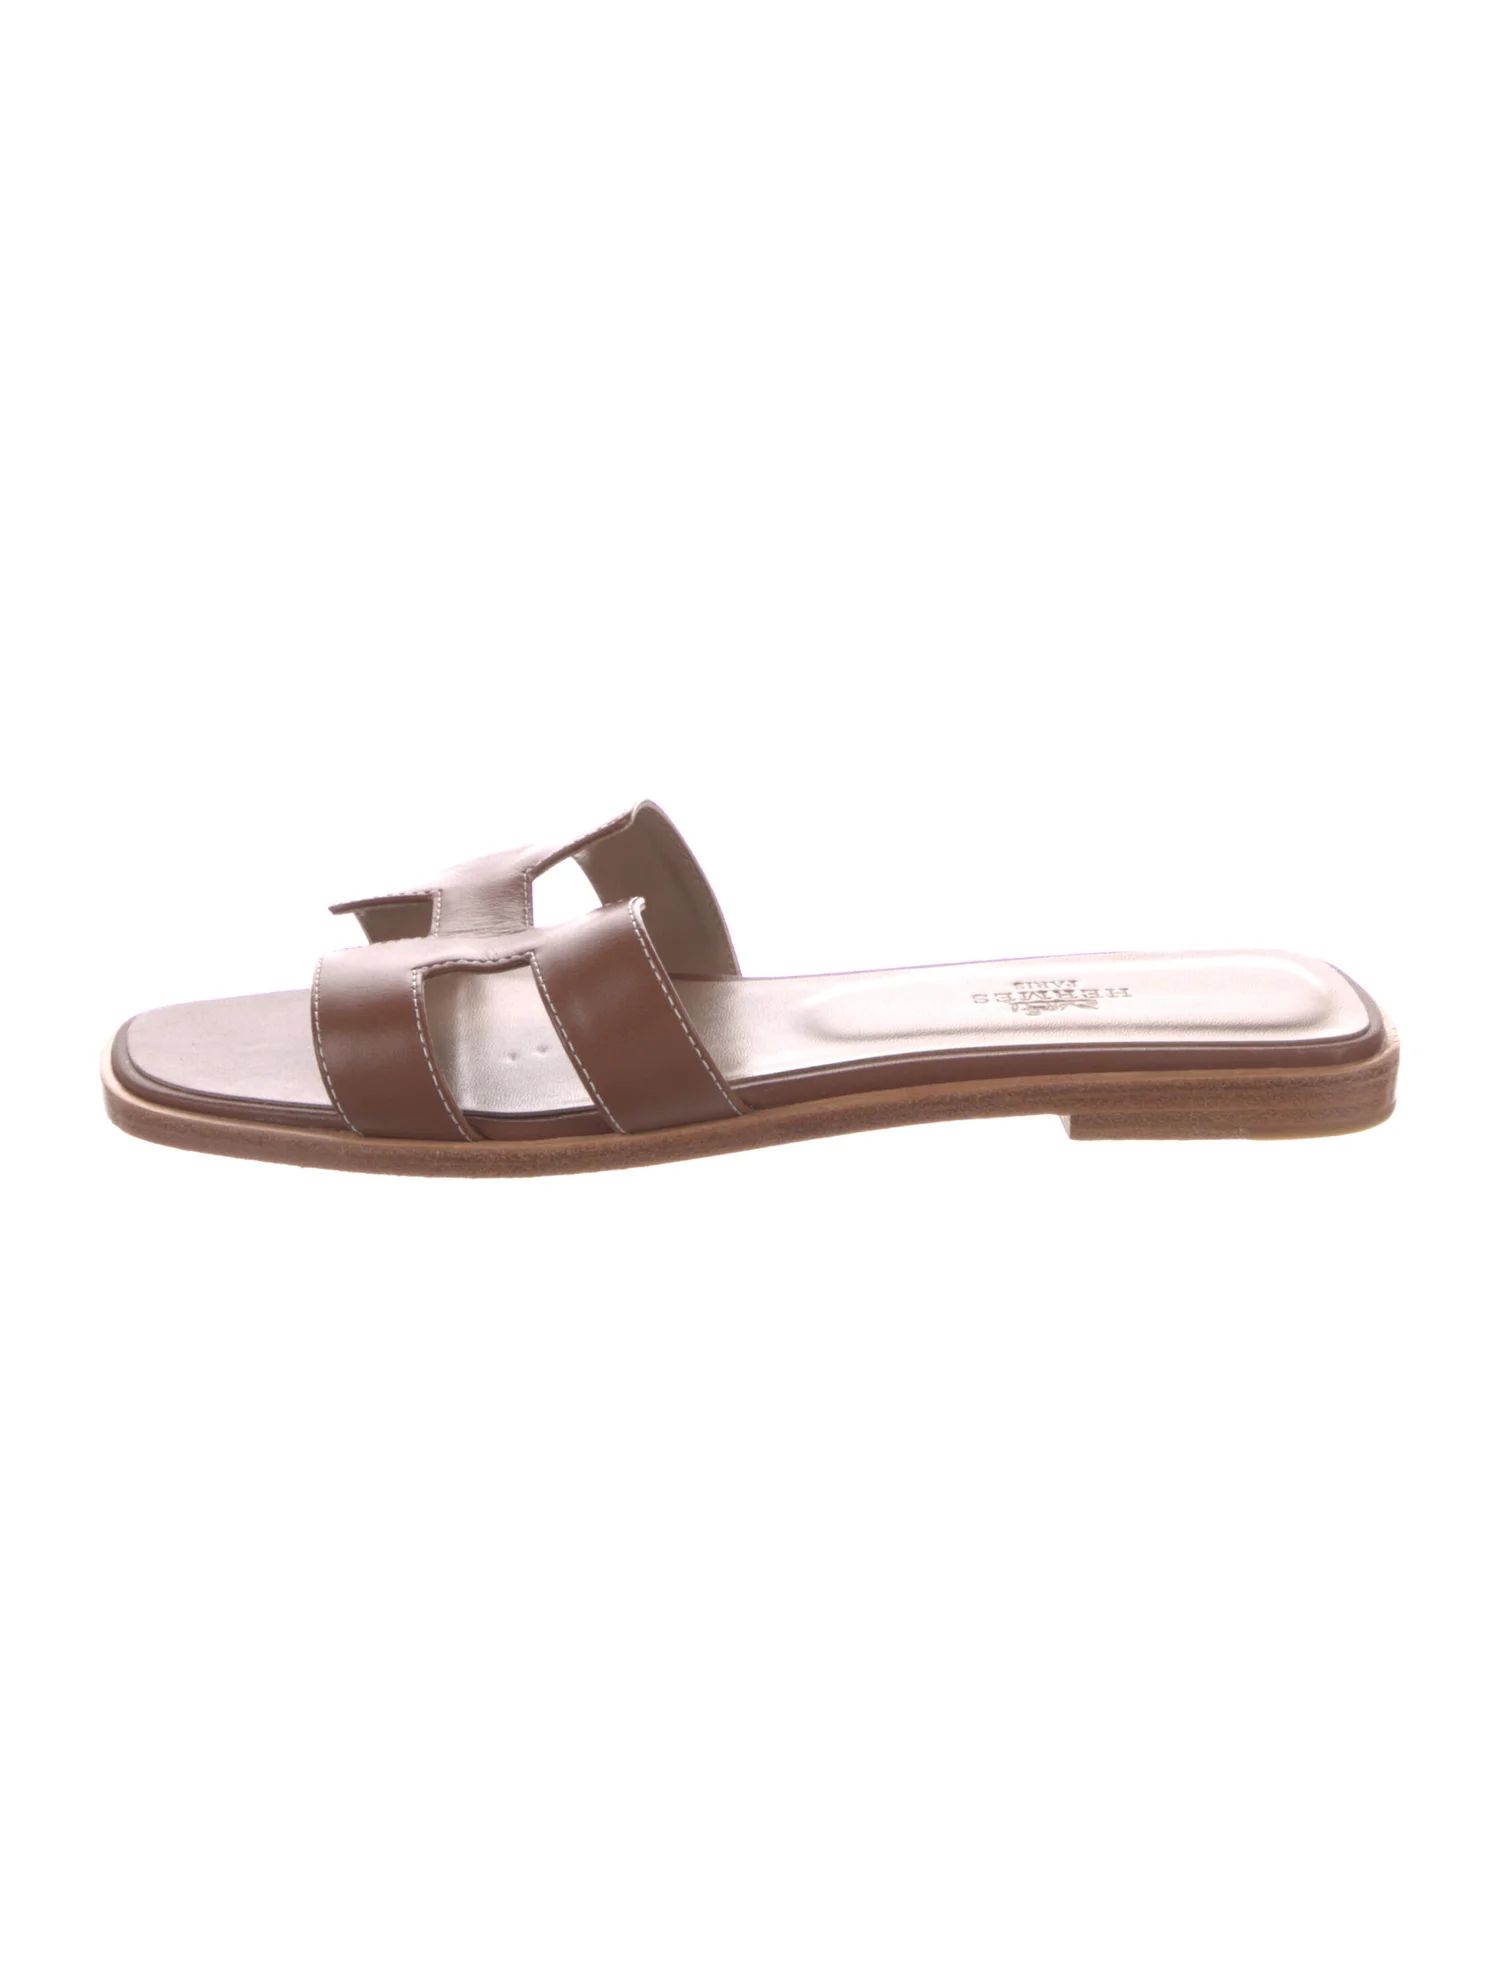 Oran Leather Slides | The RealReal